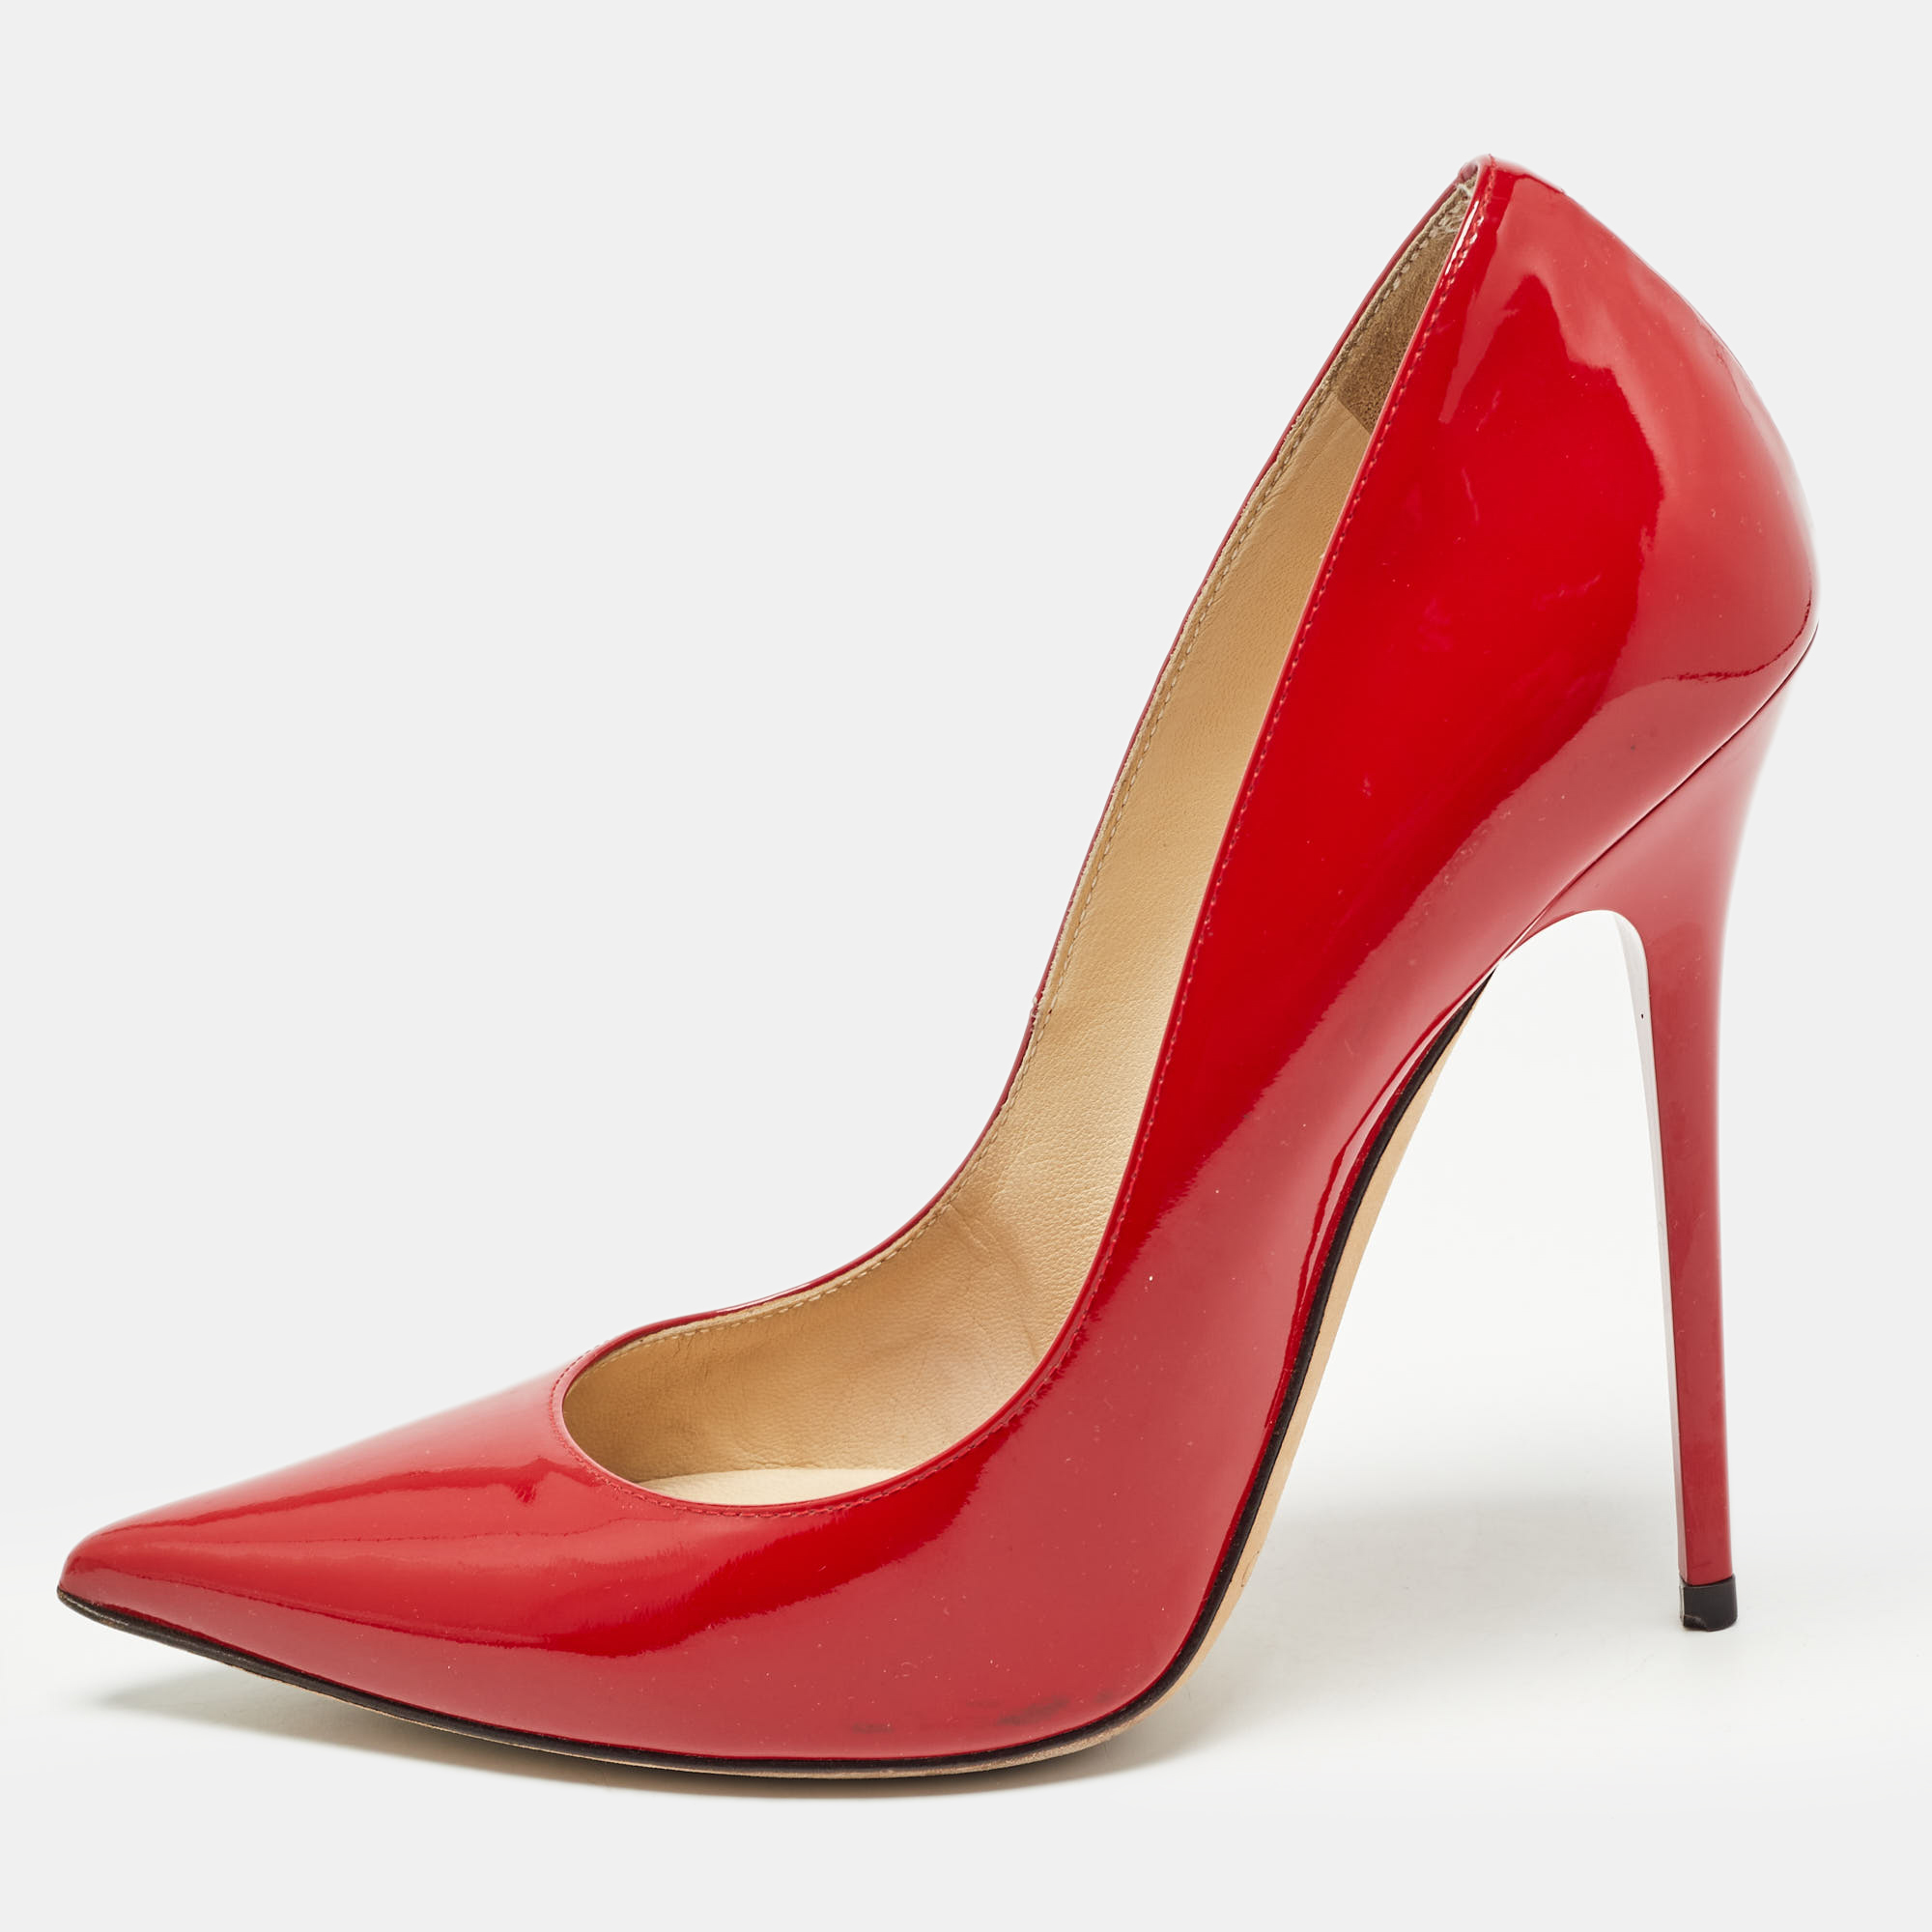 

Jimmy Choo Red Patent Leather Romy Pumps Size